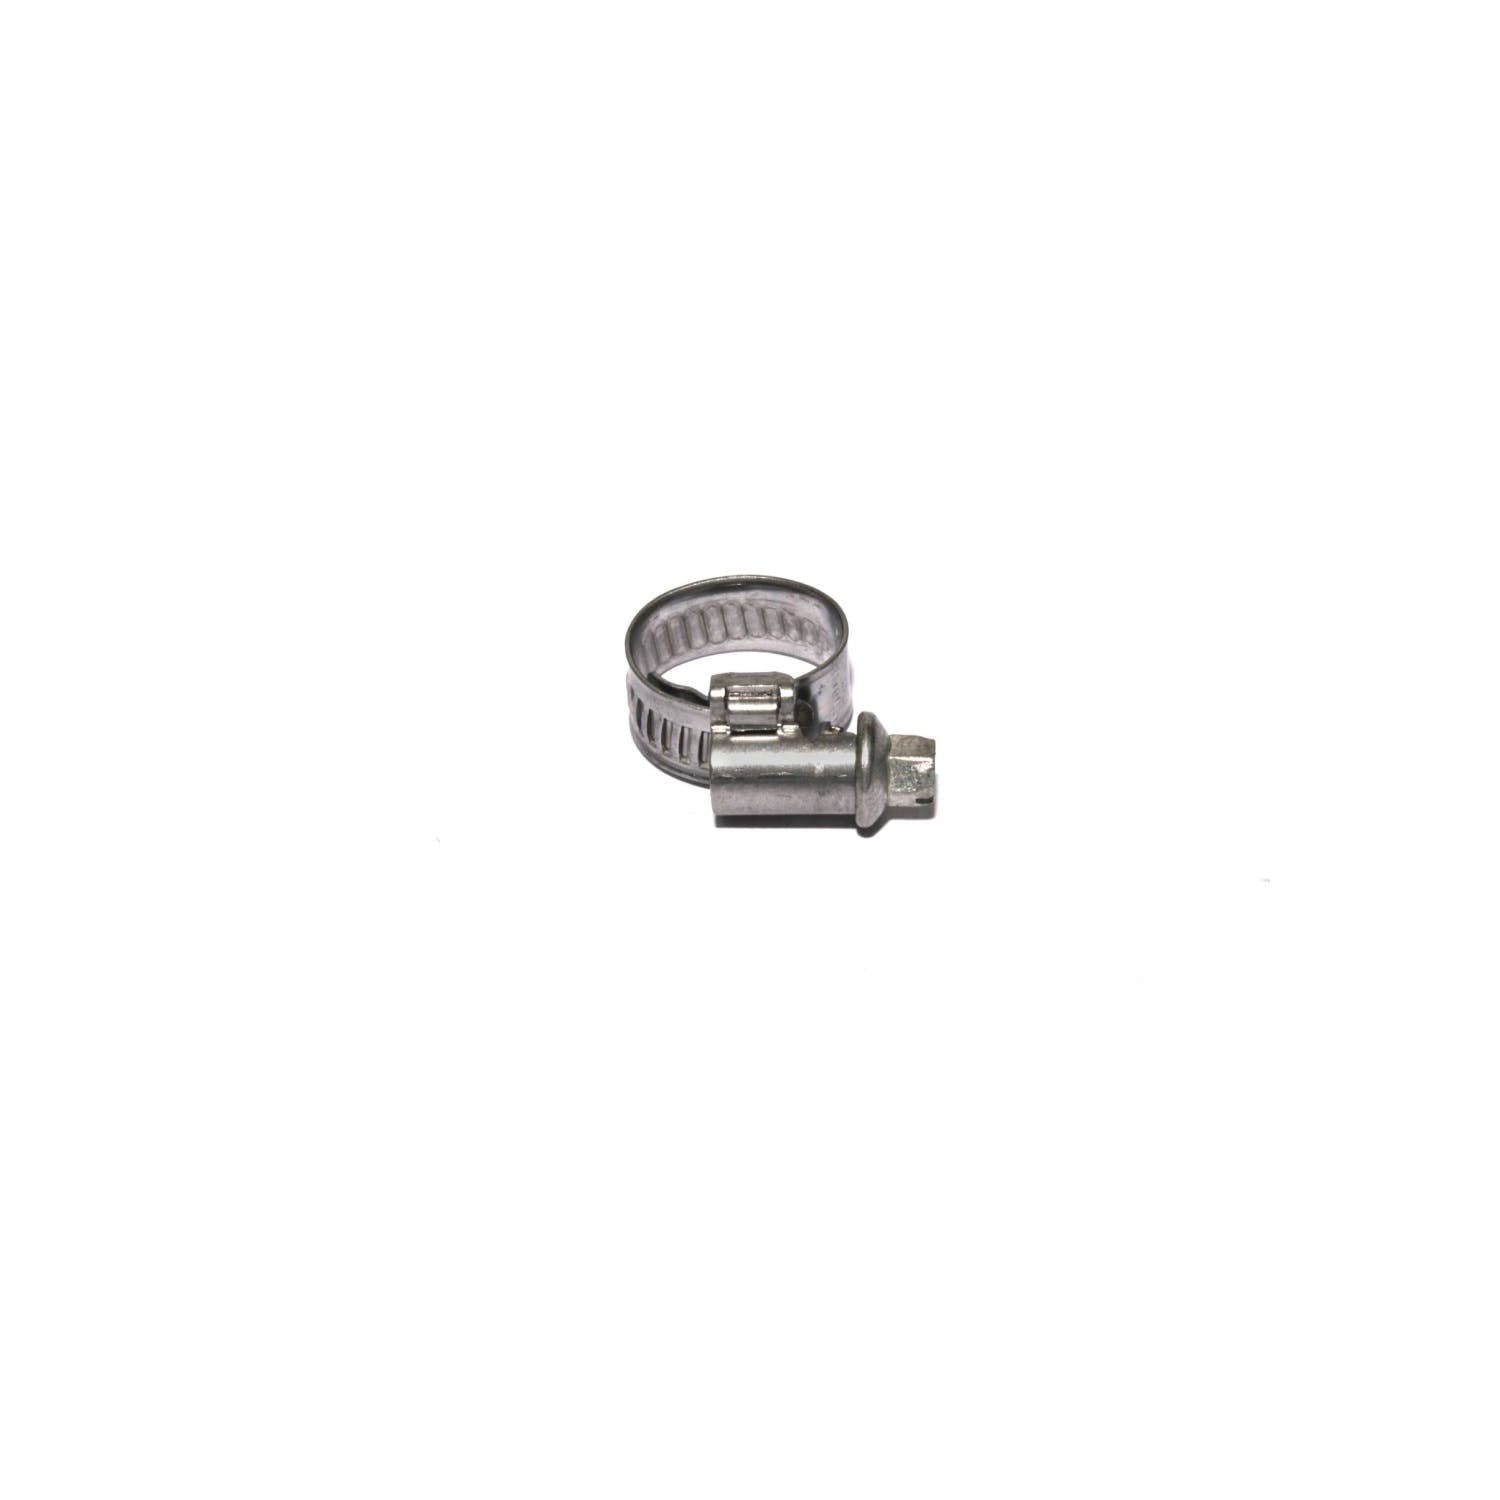 Competition Cams G31220 Gator Brand Performance Hose Clamps